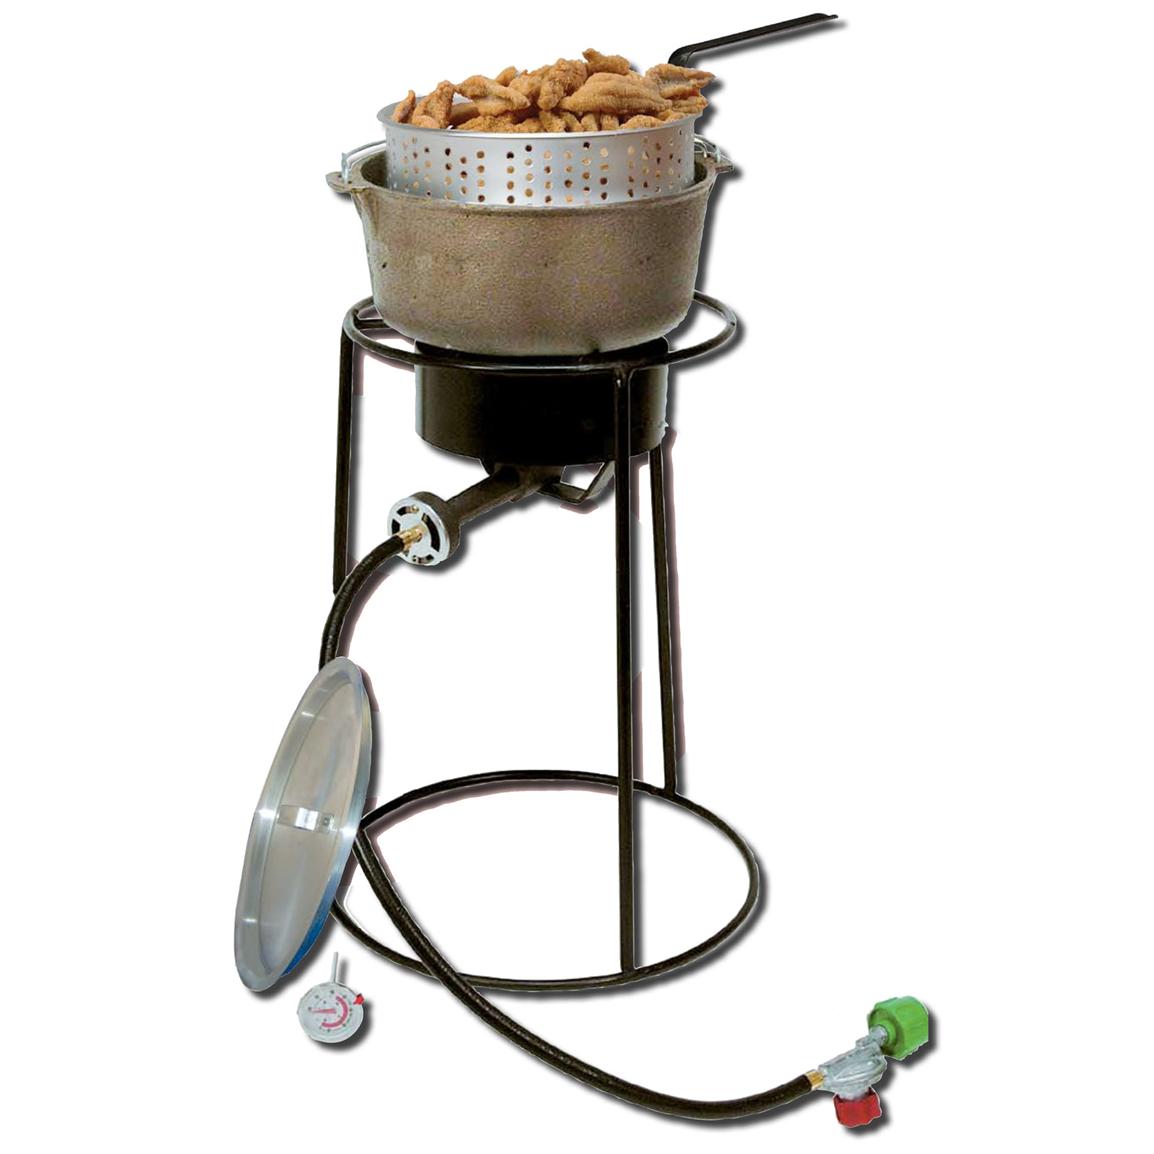 King Kooker® 22 inch Outdoor Cooker with Cast Iron Pot and Aluminum Lid